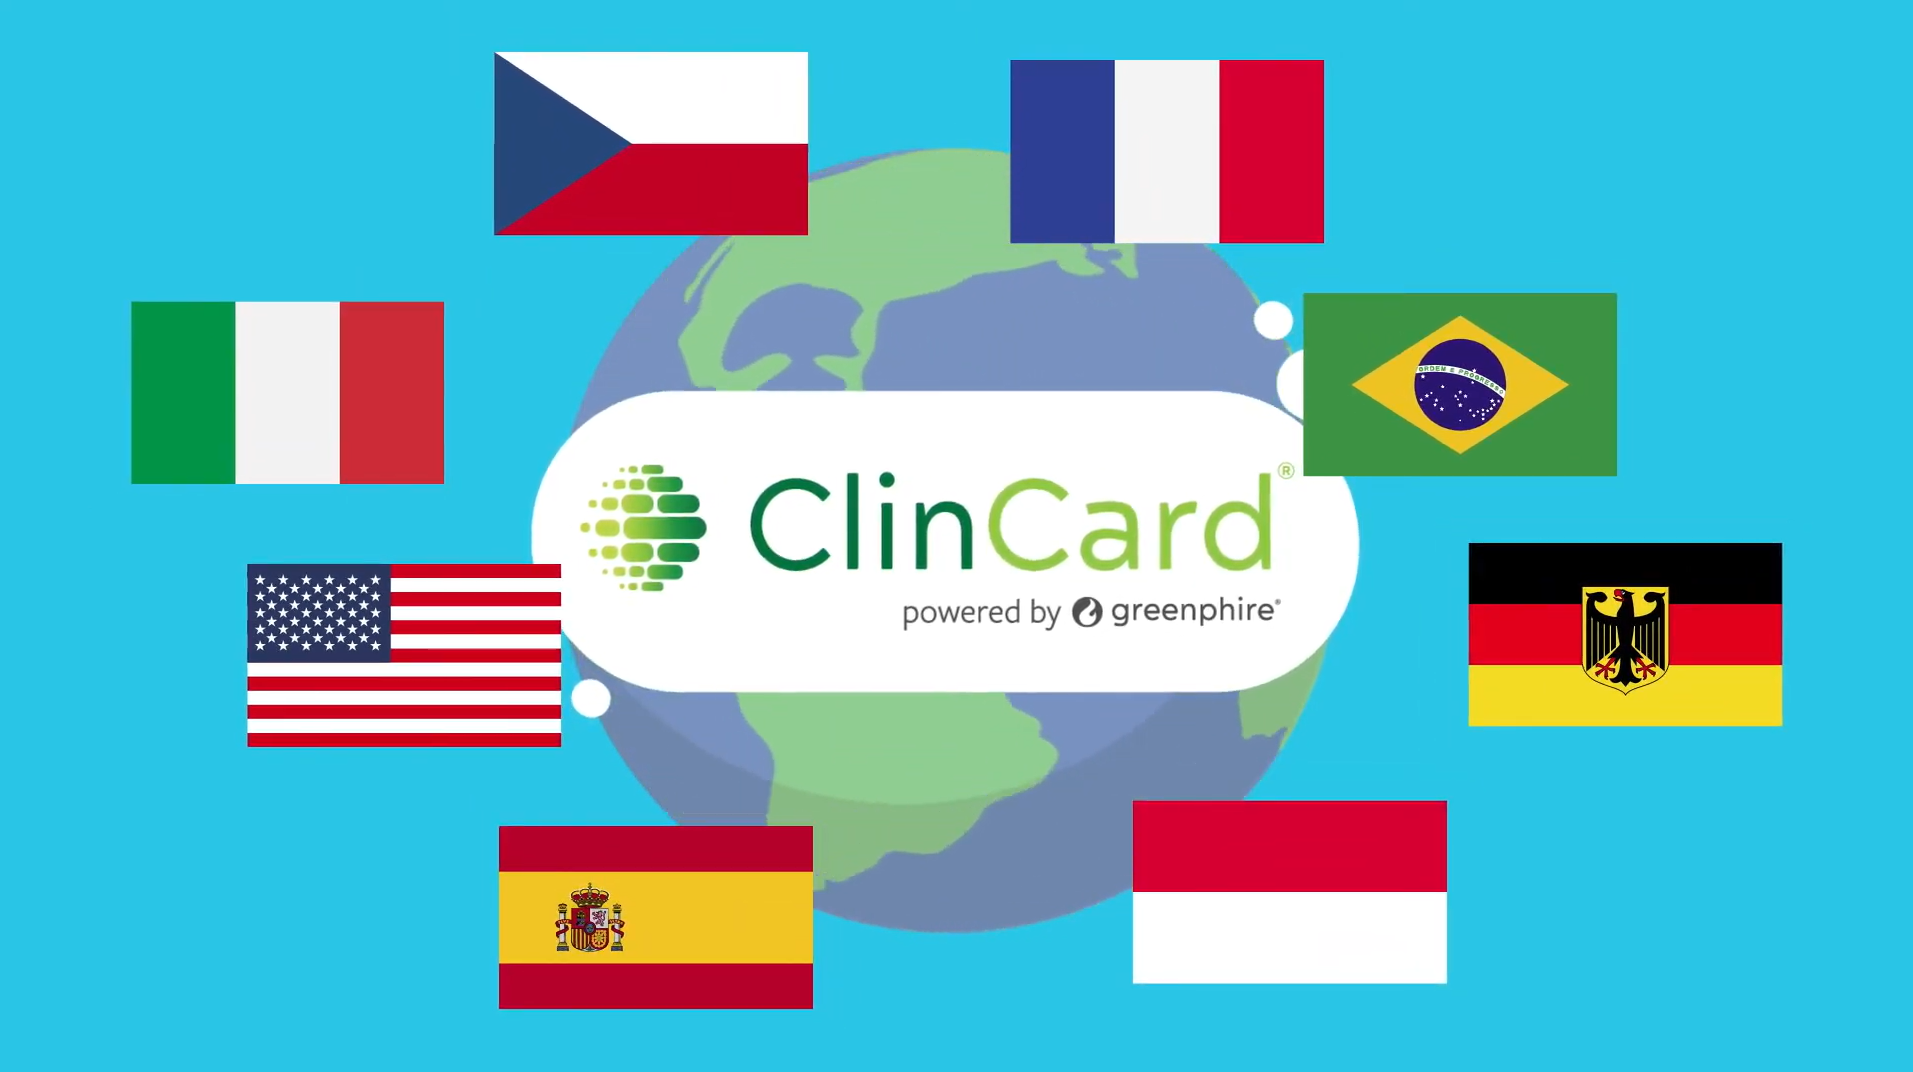 Why Sites Around the World Love ClinCard